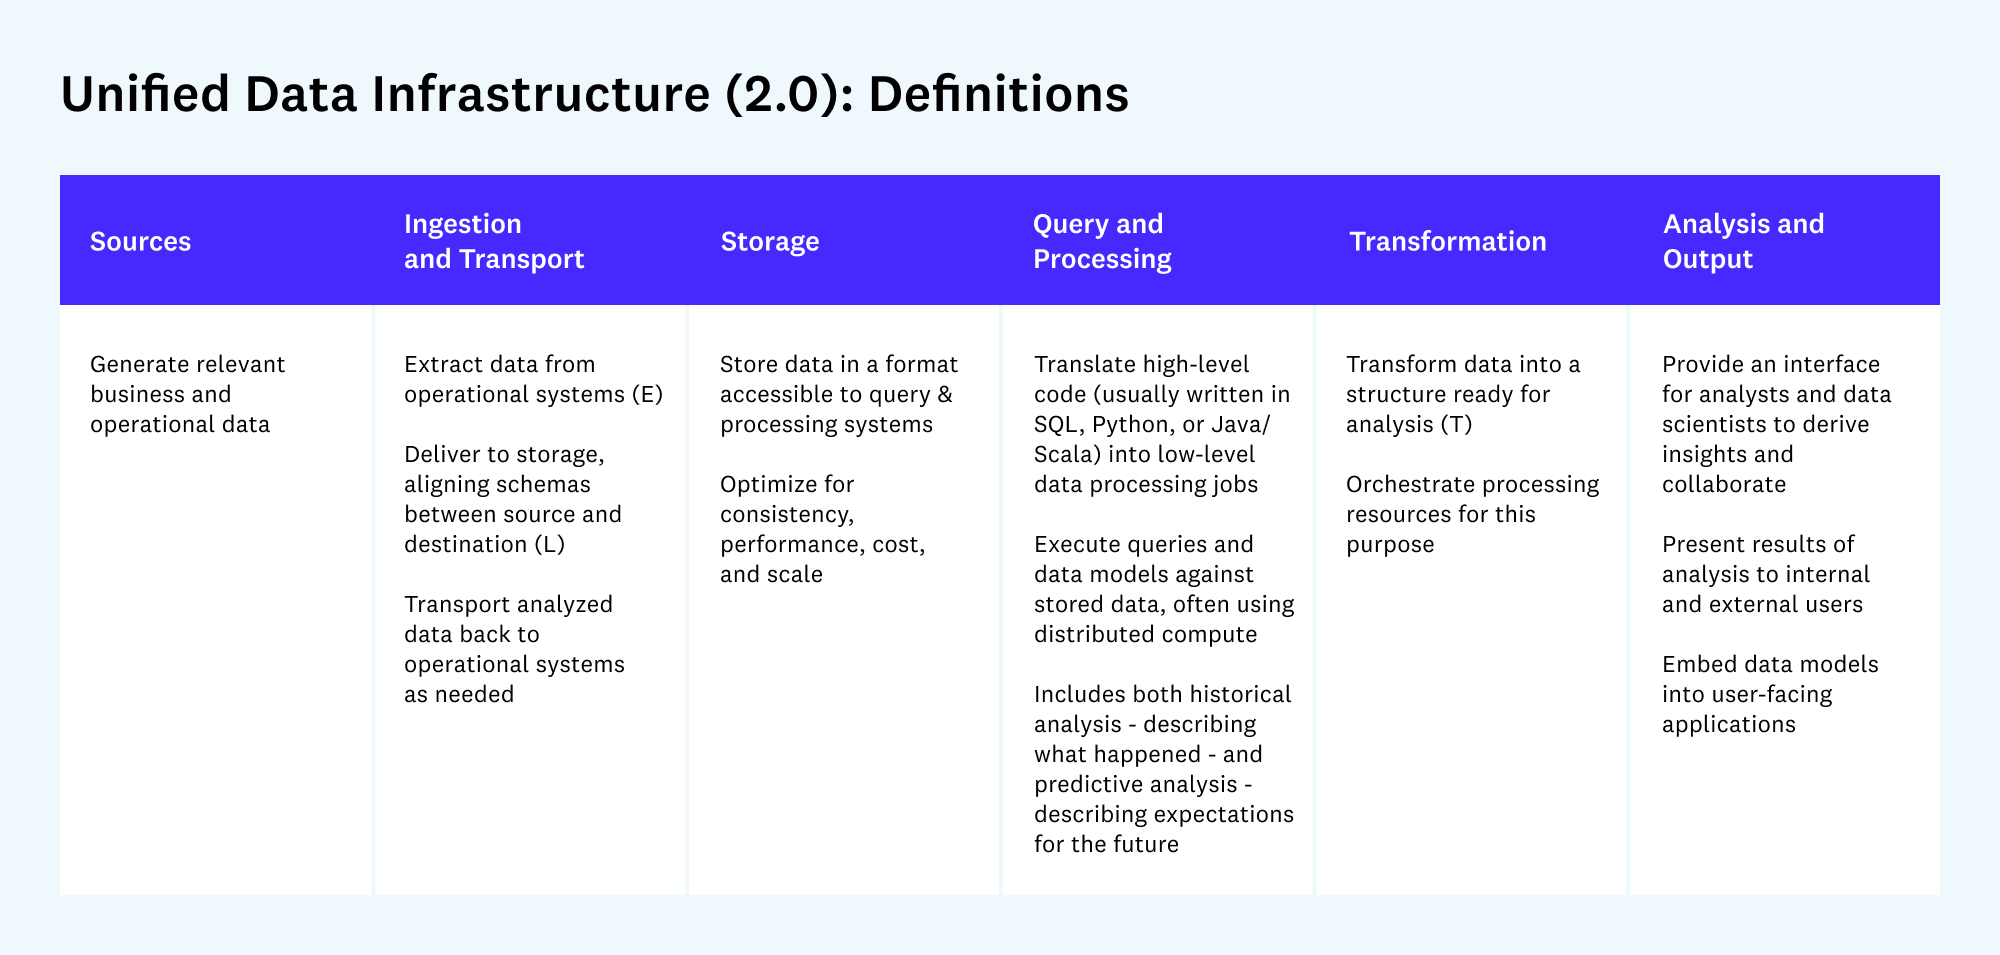 Unified Data Infrastructure (2.0) - Definitions